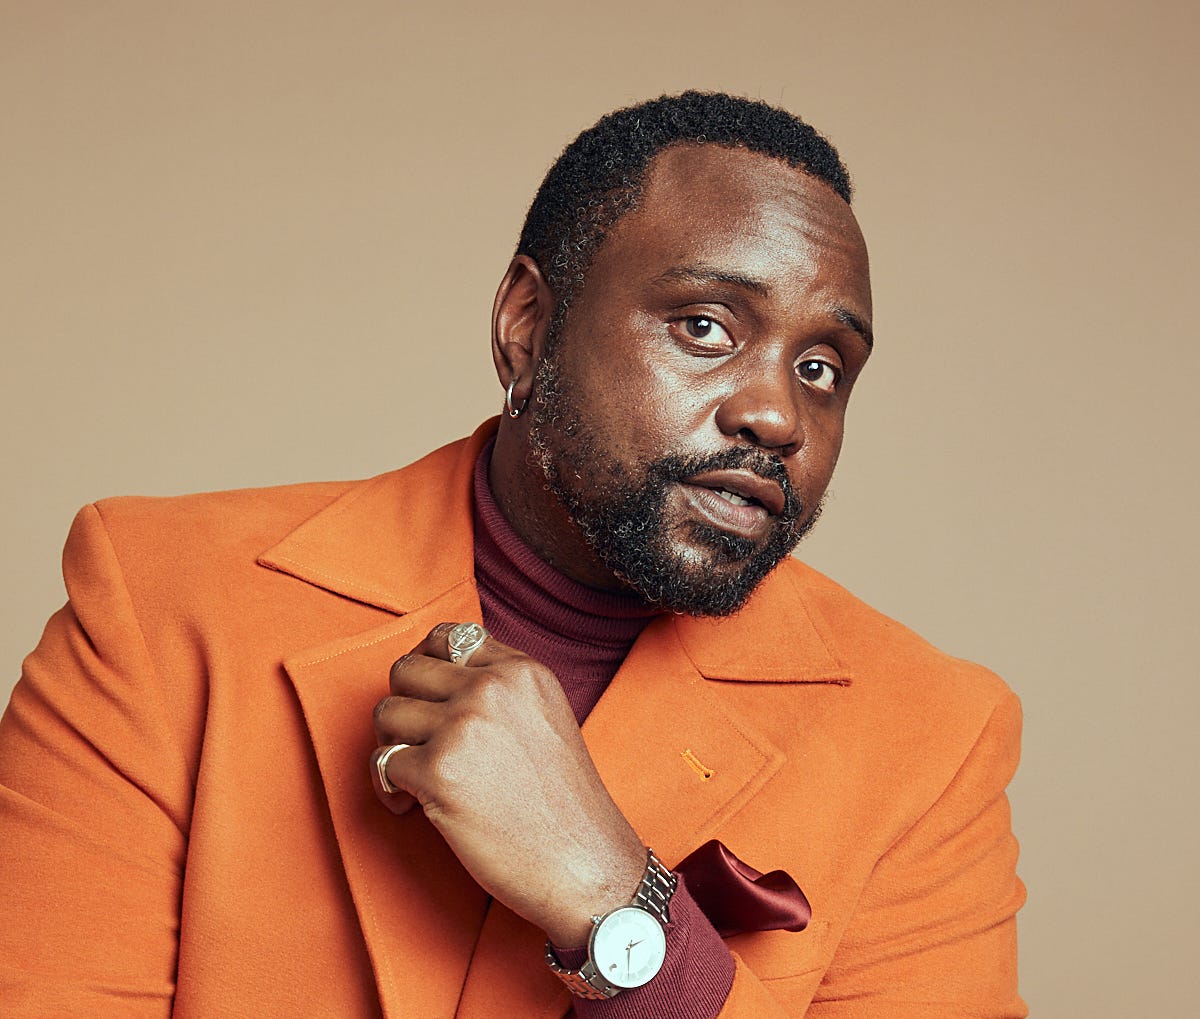 Brian Tyree Henry poses in a stylish orange suit.